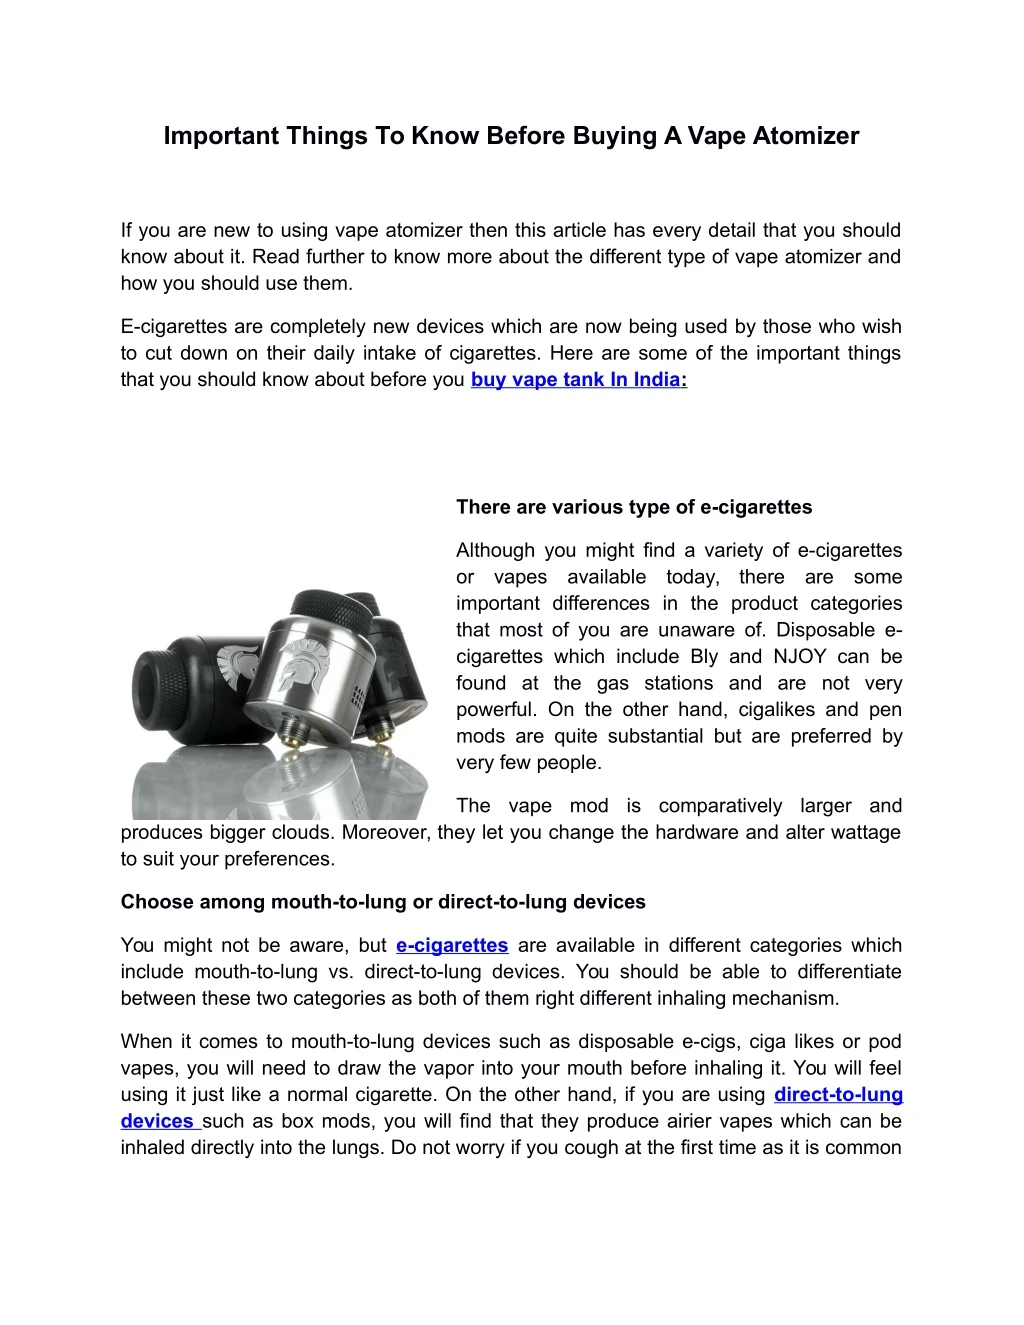 important things to know before buying a vape